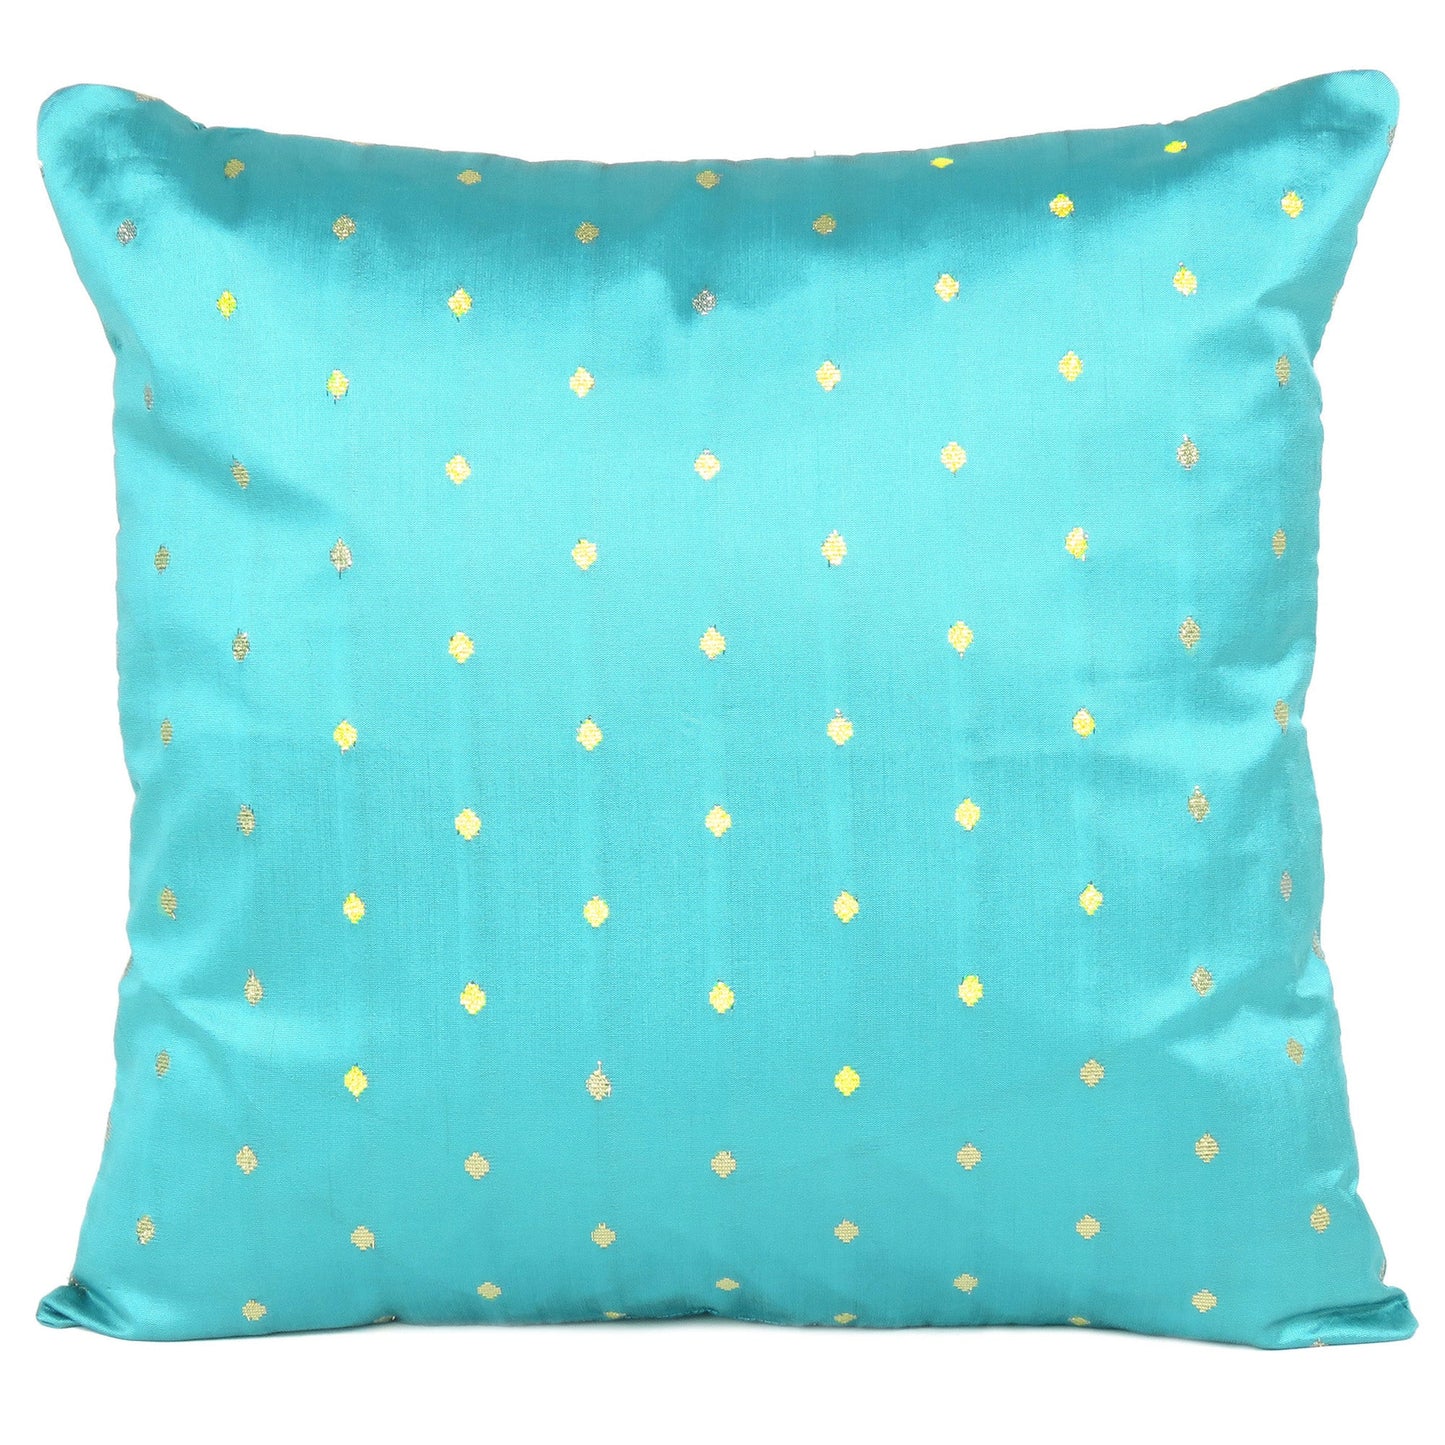 Art Silk Turquoise Cushion Covers in Set of 2